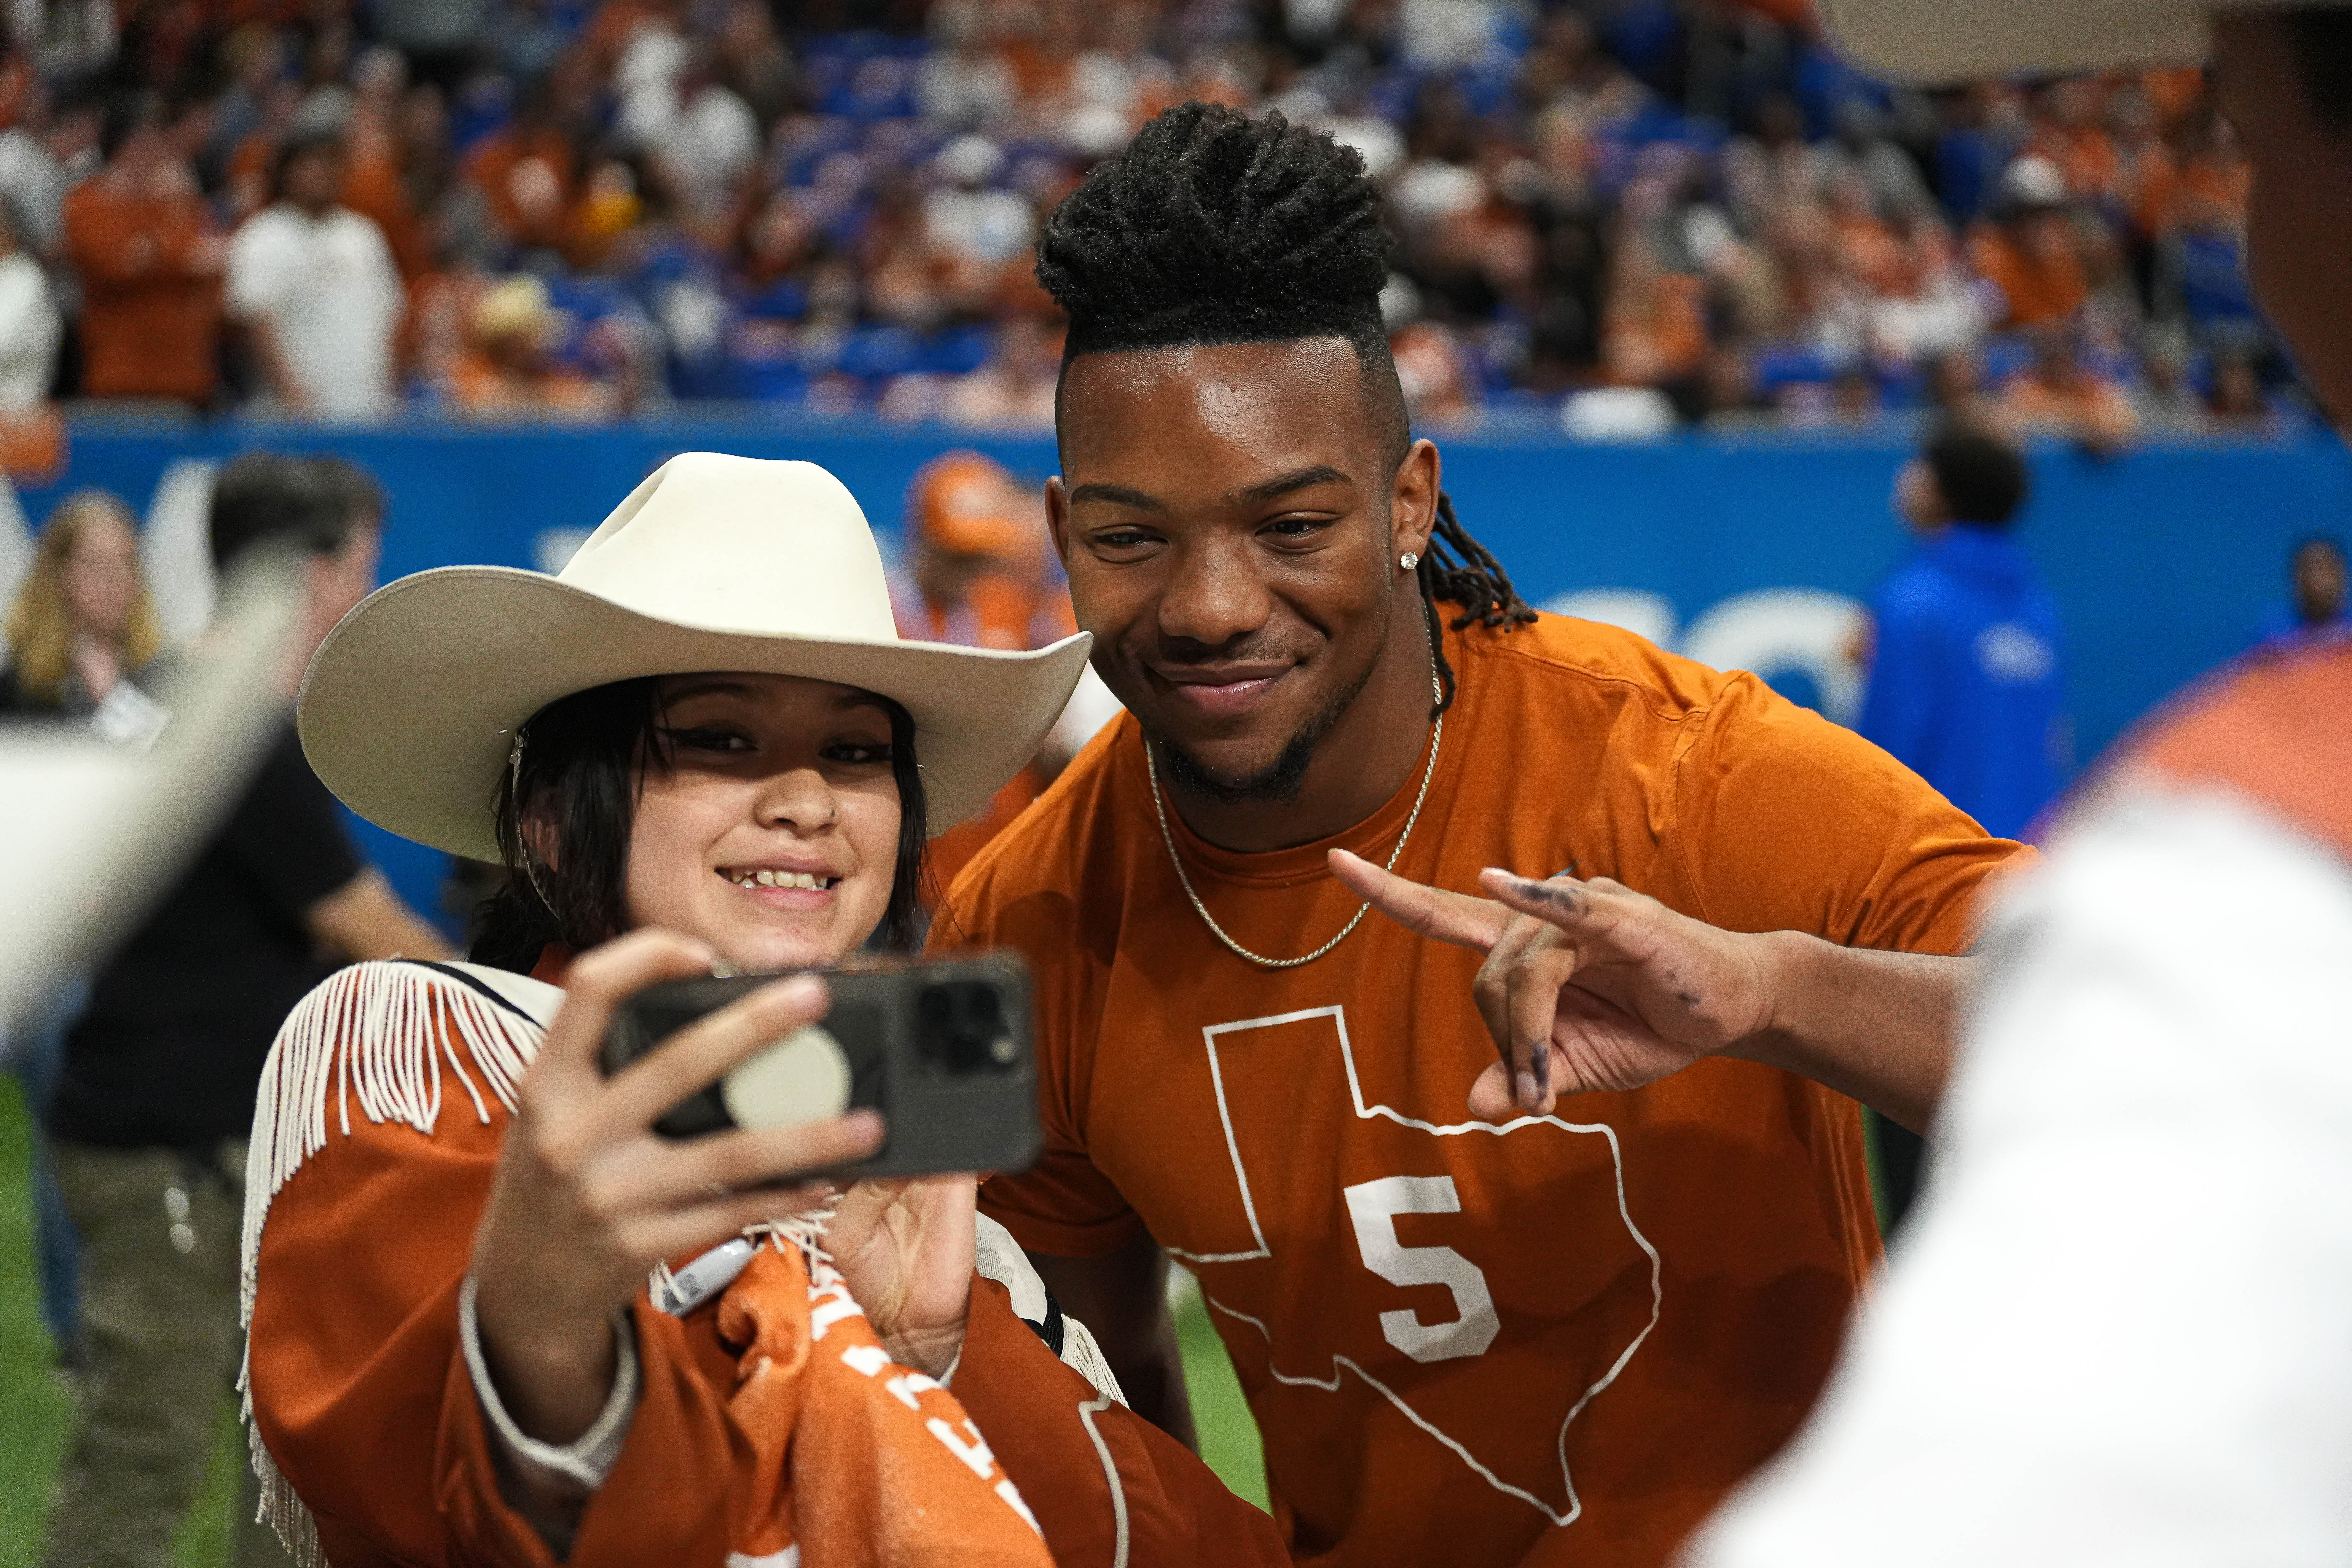 Texas Longhorns running back Bijan Robinson takes a photo with a band member before the Alamo Bowl at the Alamodome, Dec. 29, 2022 in San Antonio.